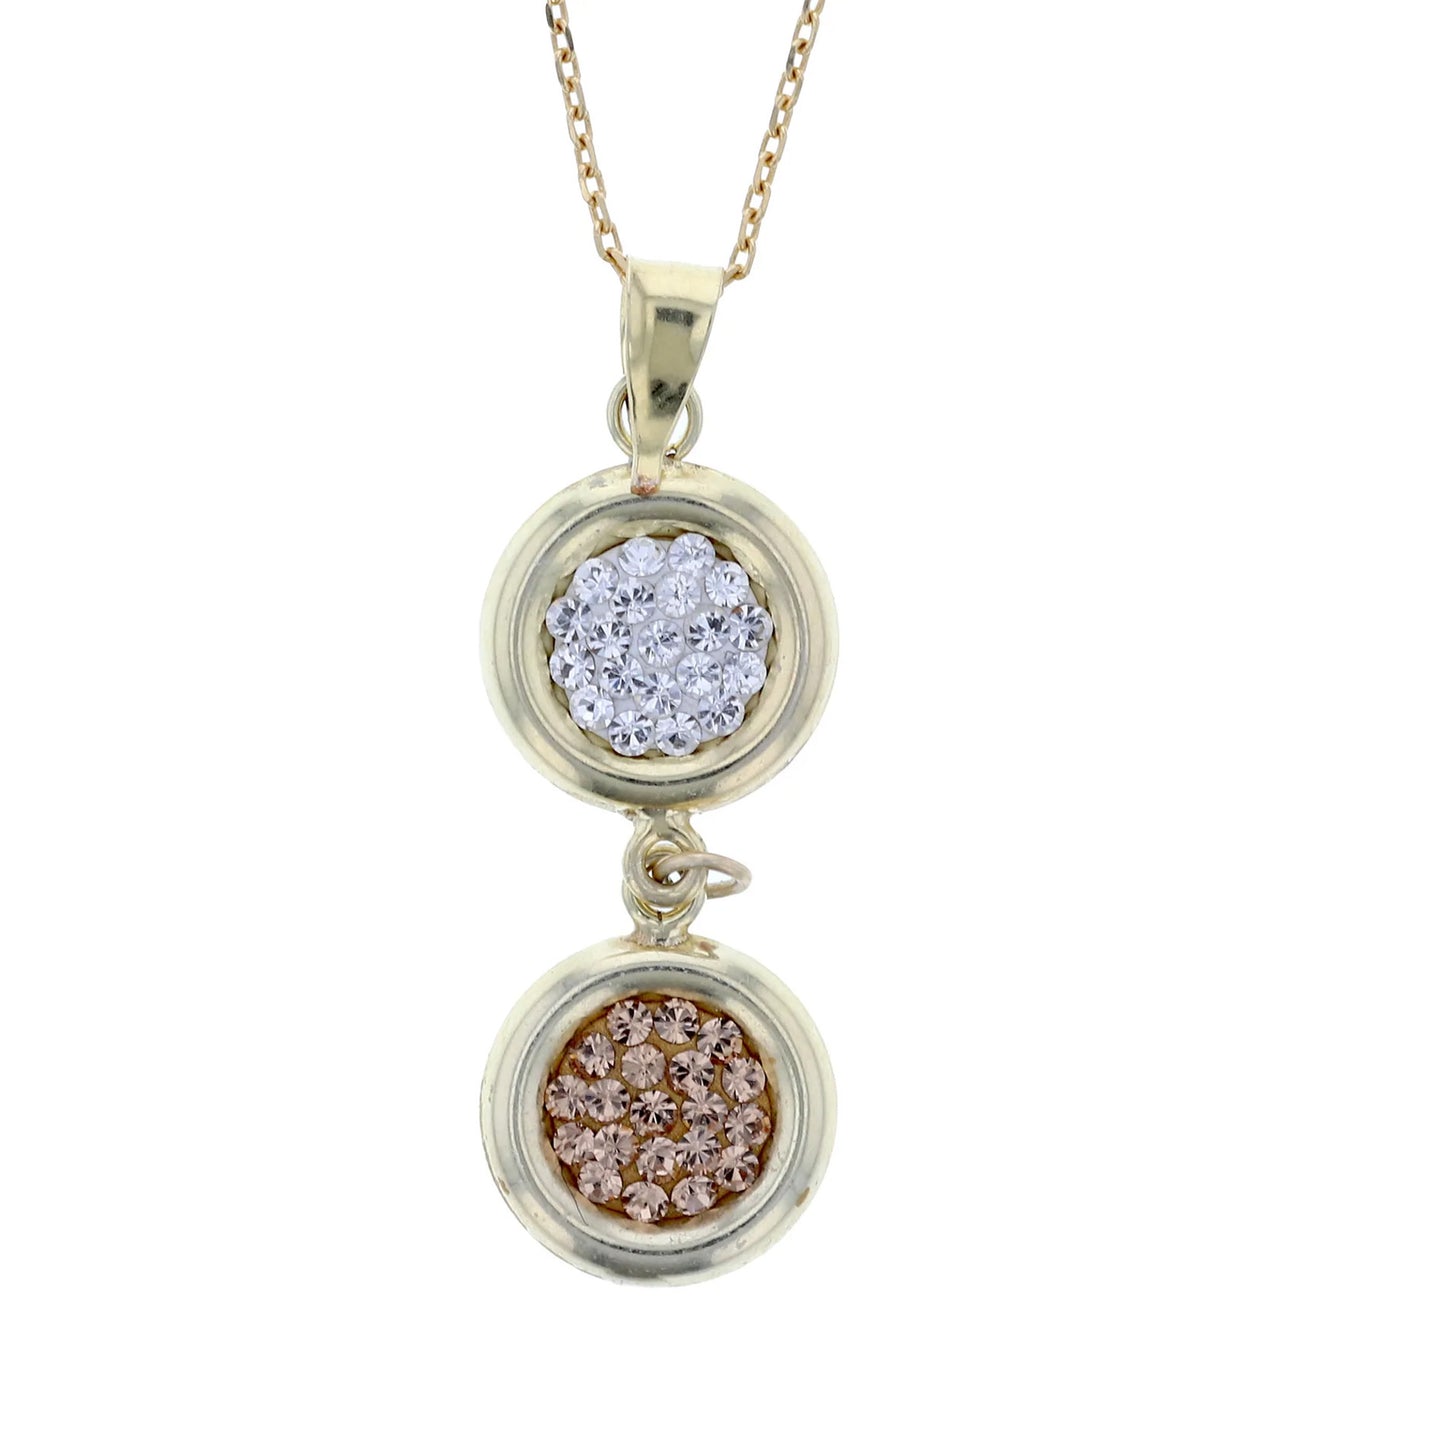 18K Gold Plated Sterling Silver Double Circle Drop Pendant Necklace with White and Light Colorado Topaz Crystals.